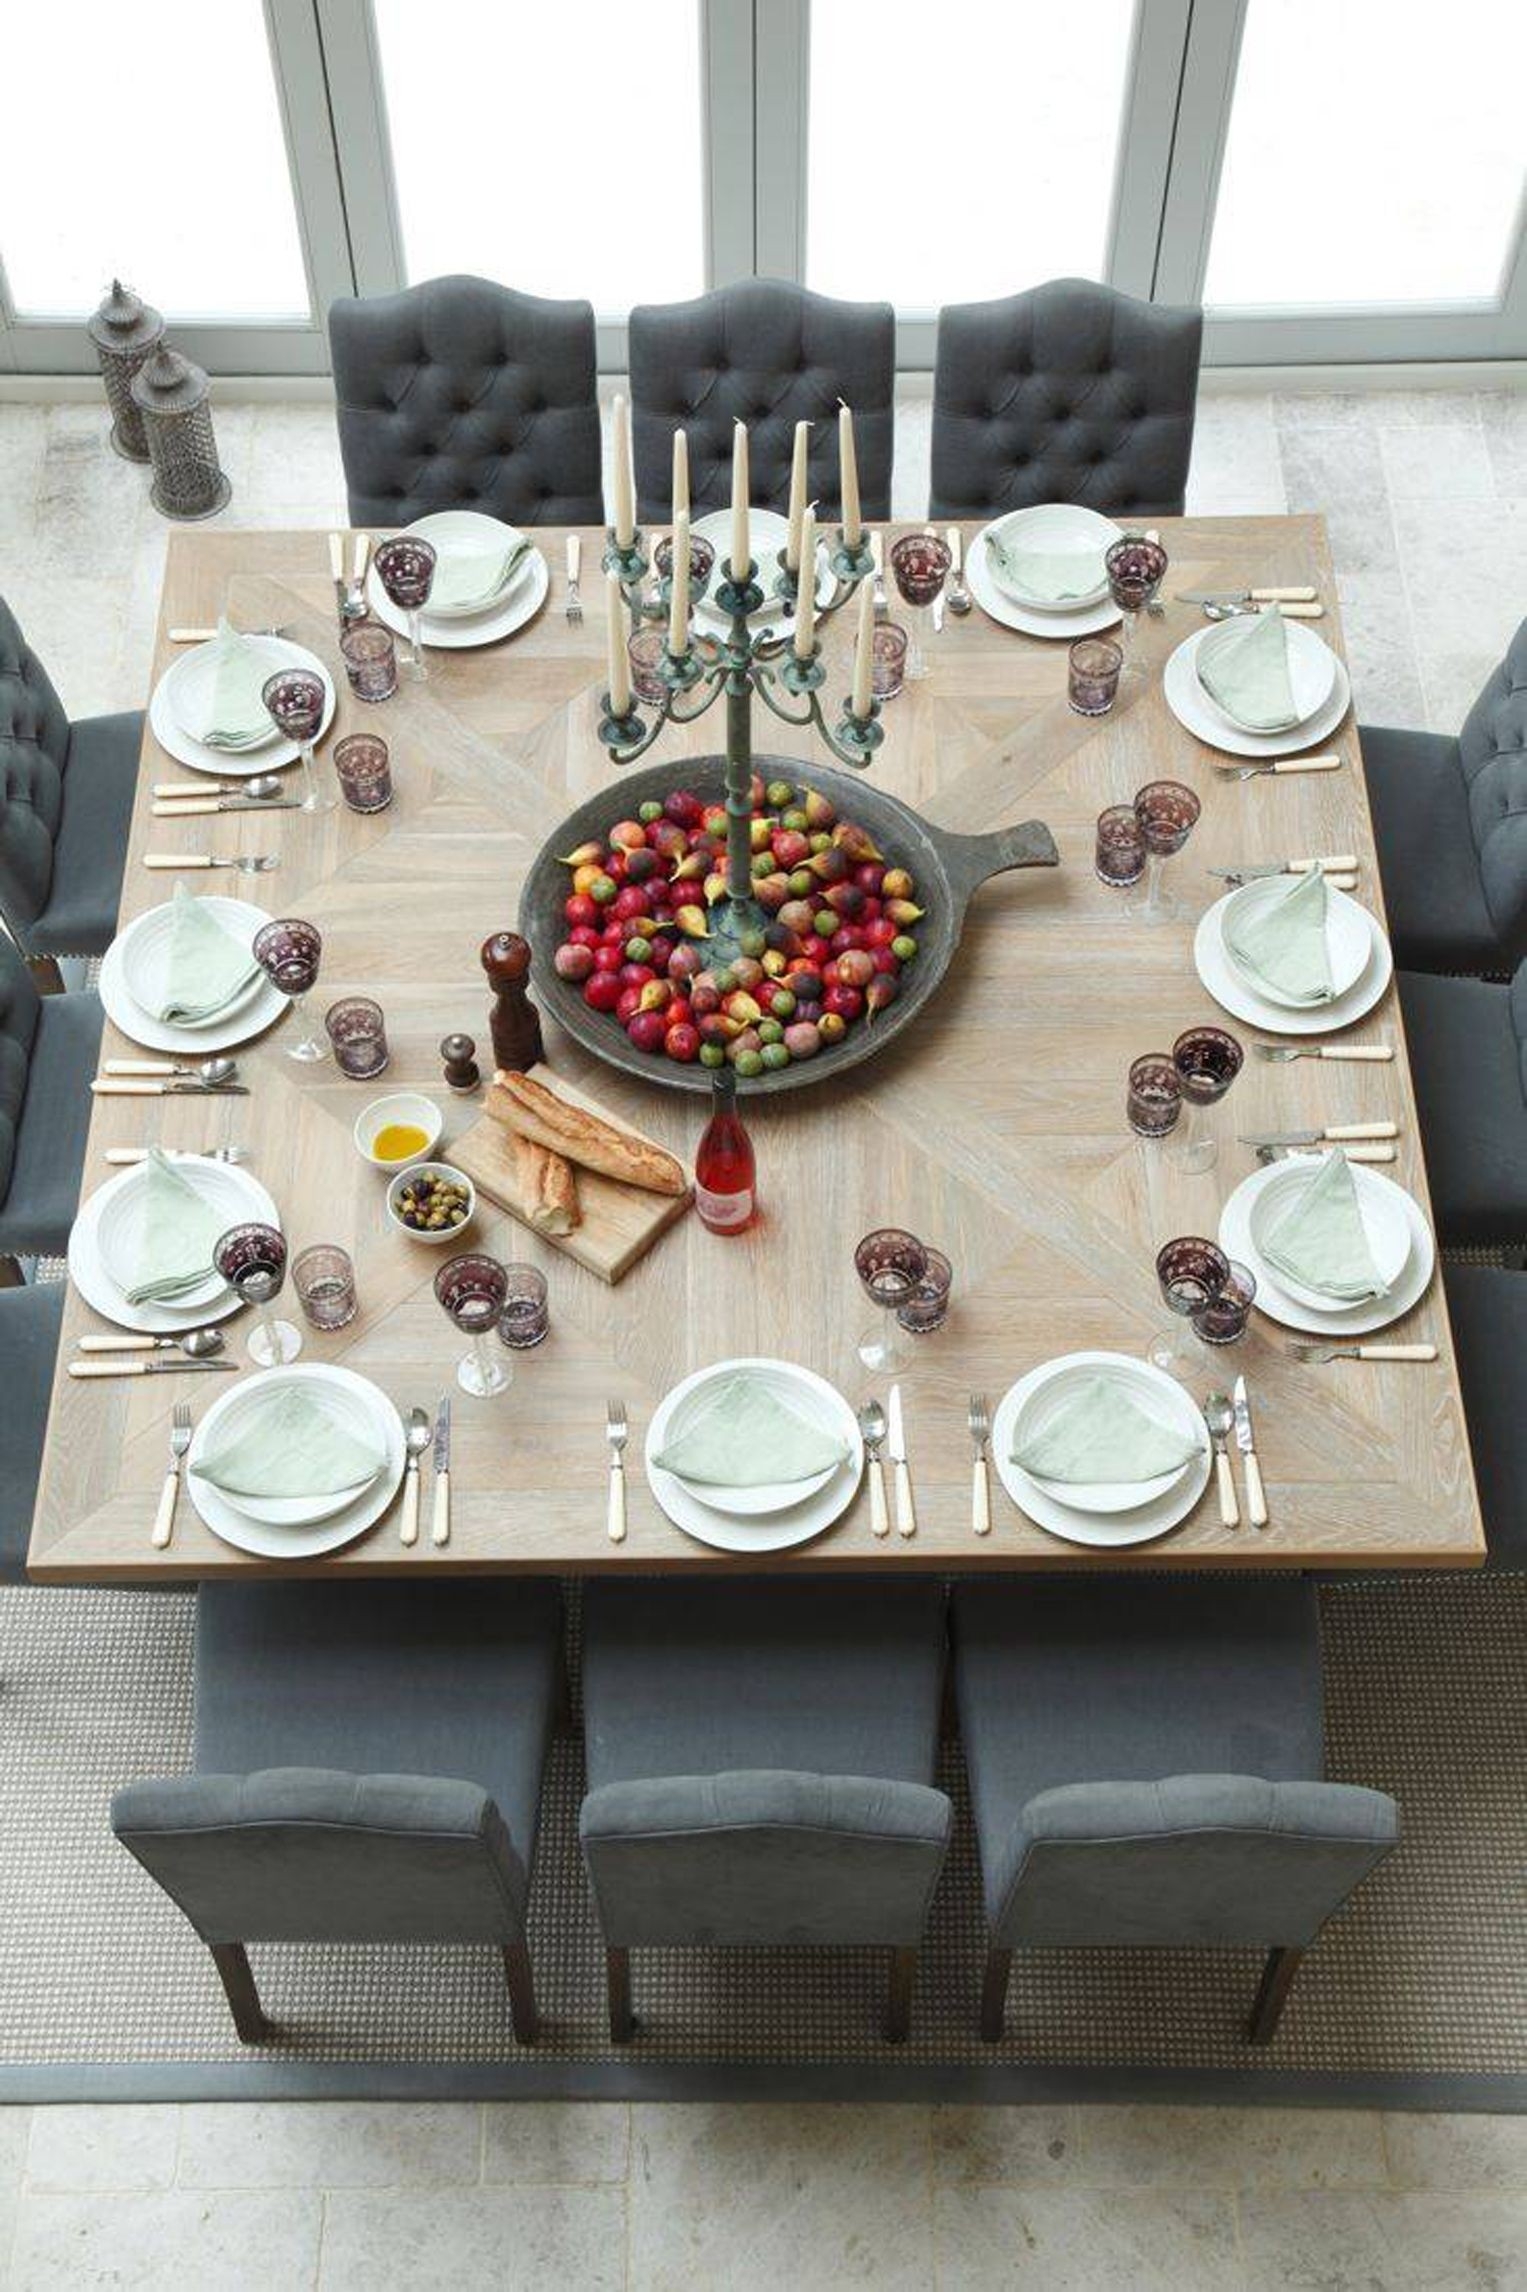 Dining Room Tables That Seat 12 - Ideas on Foter